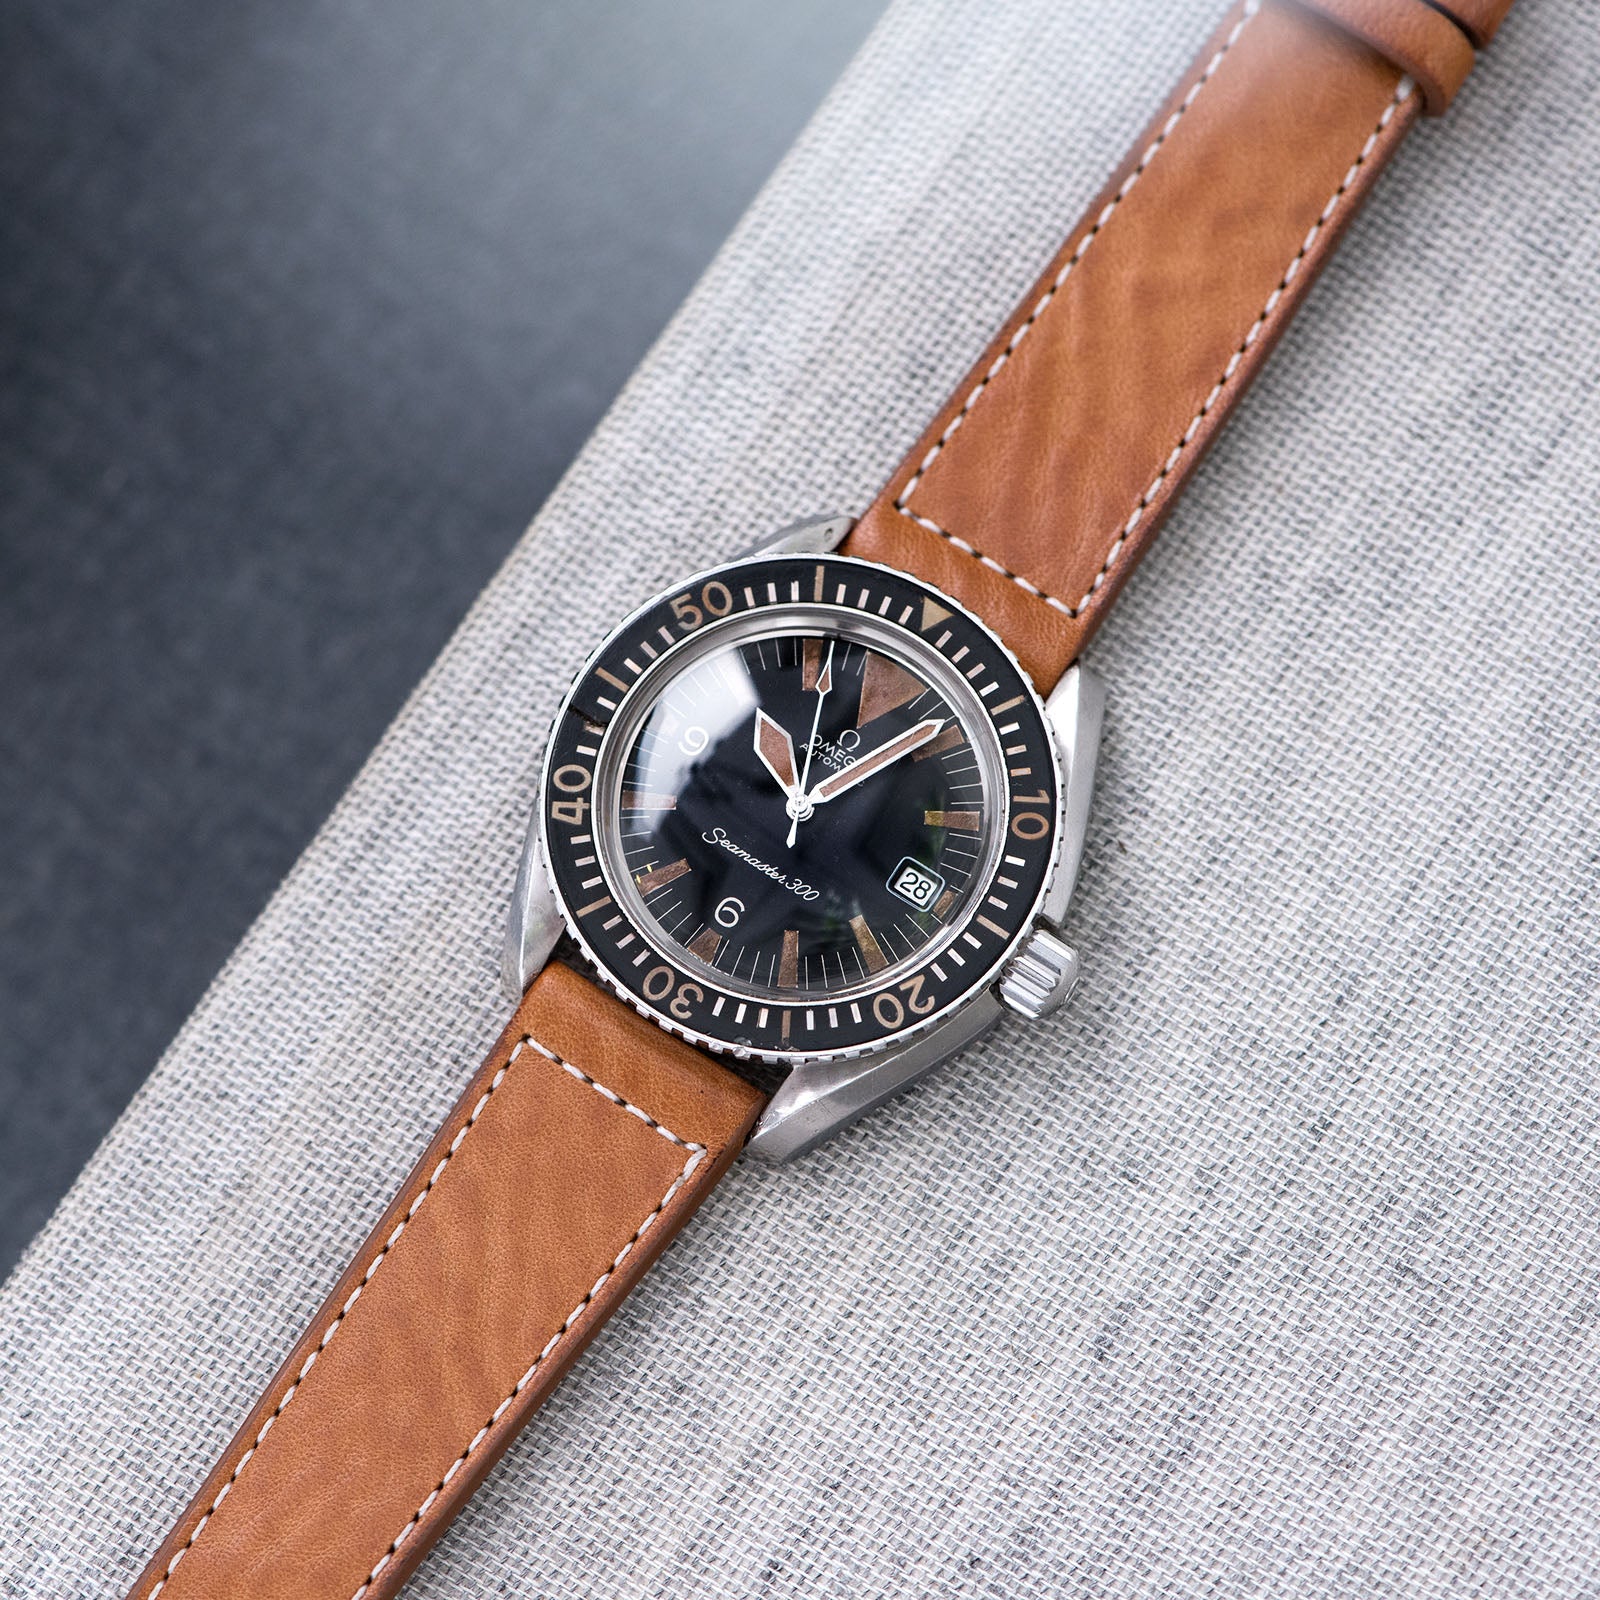 Bulang and Sons_Strap Guide_The omega SM 300 Seamaster_Gilt Brown Leather Watch Strap